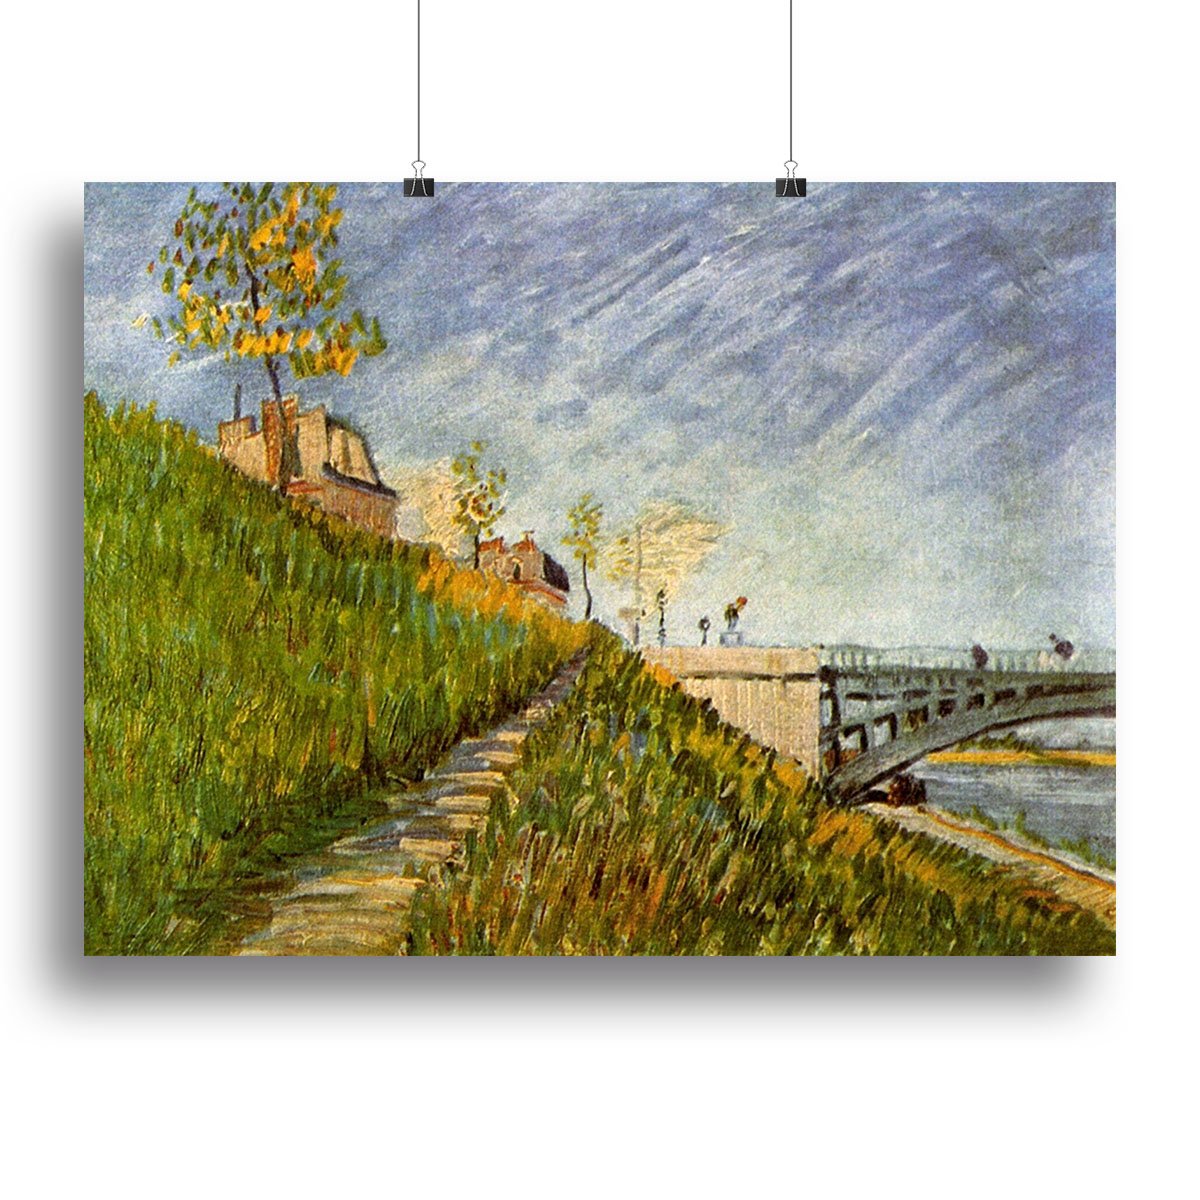 Banks of the Seine with Pont de Clichy by Van Gogh Canvas Print or Poster